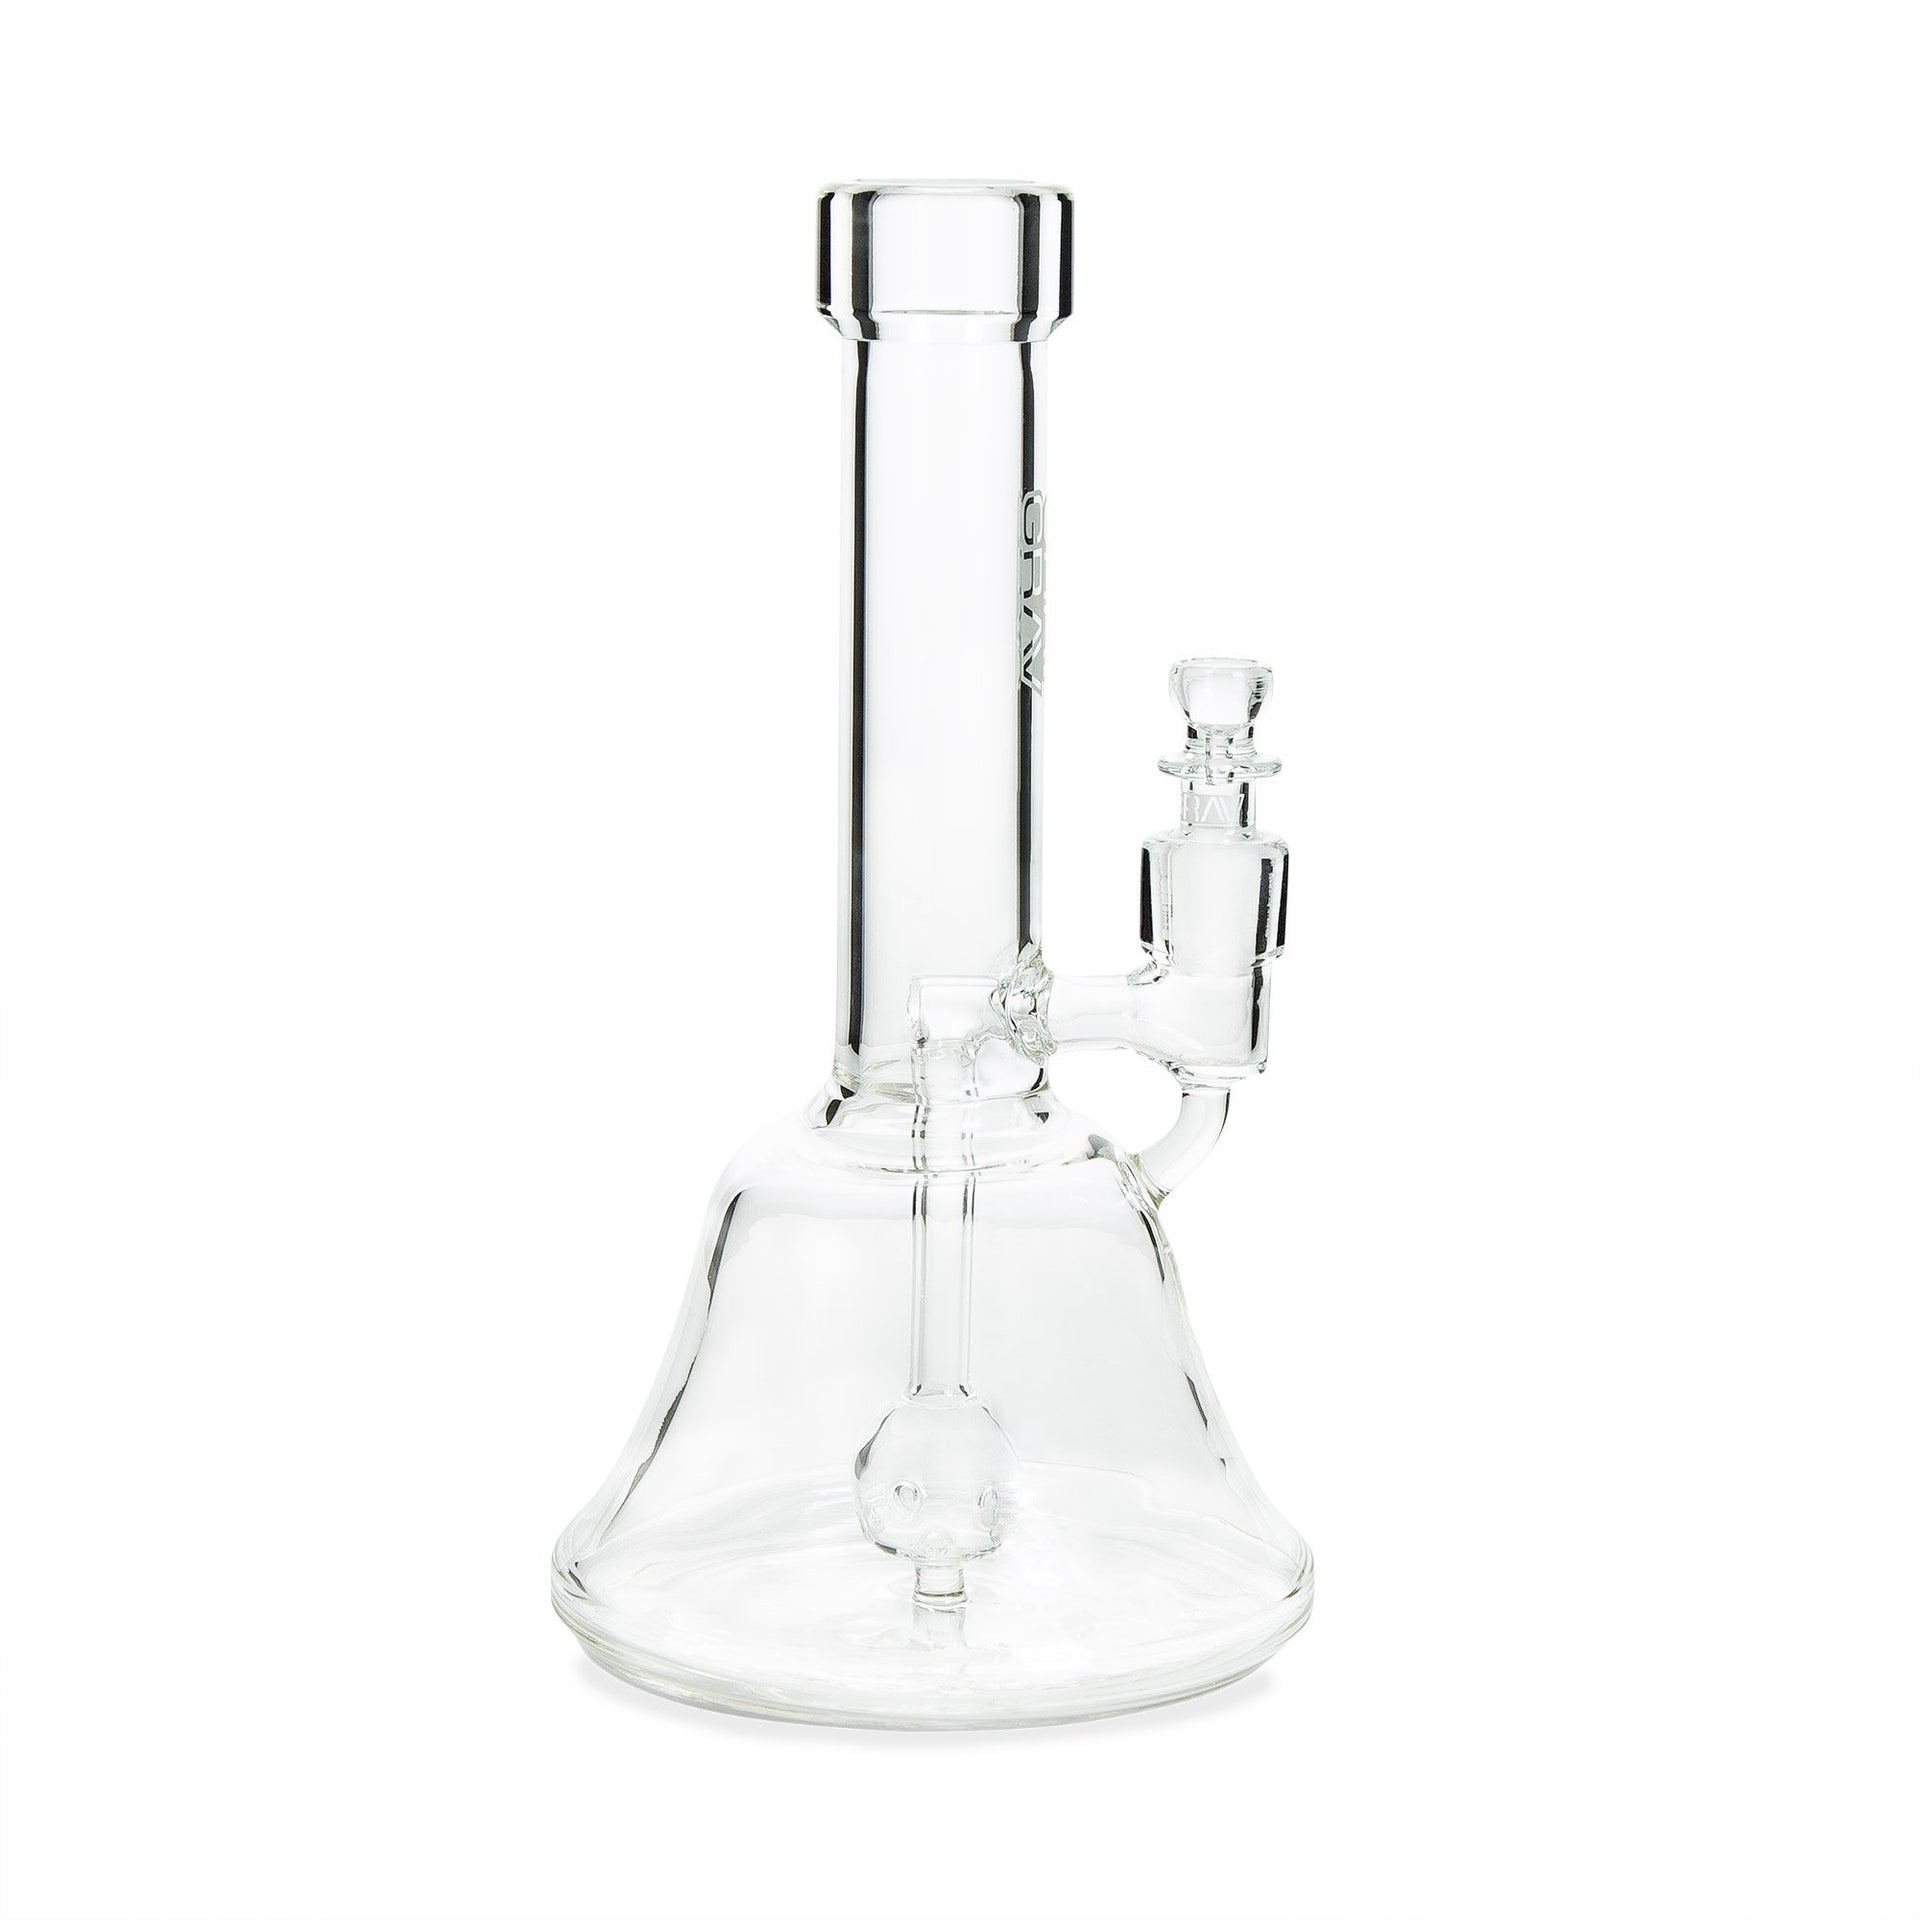 GRAV 9in Bell Base w/Orb Perc - 420 Science - The most trusted online smoke shop.